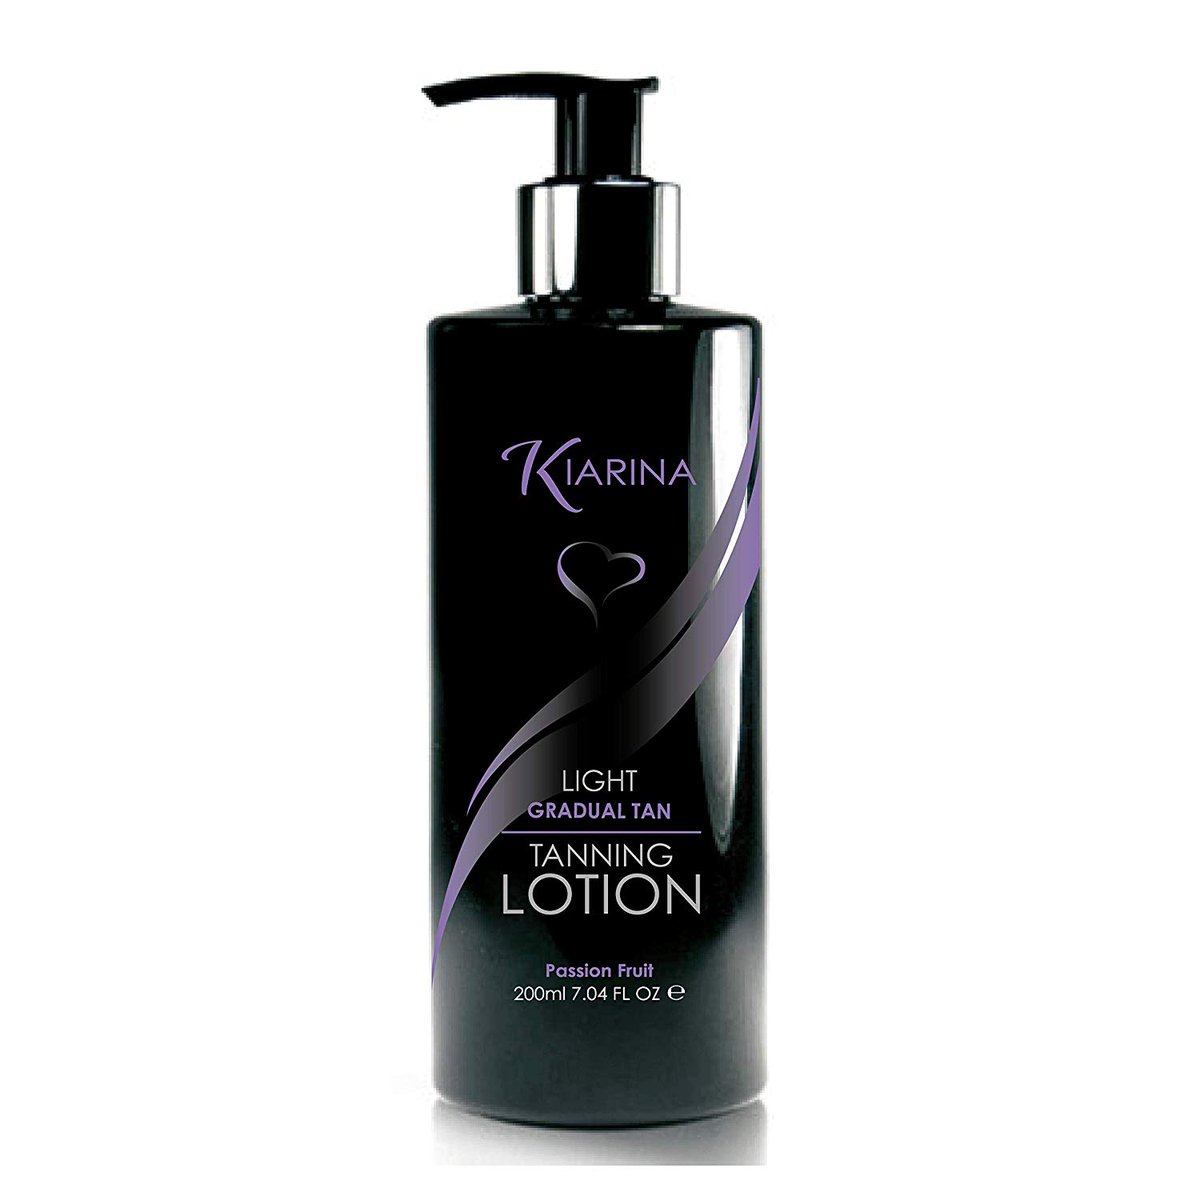 This tanning lotion is the business! Best we have EVER tried - and smells amazing too! BUY THIS NOW!
amazon.co.uk/dp/B07Z88LCZN
#tan #tanning #selftan #faketan #beauty #fashiontrend @KiarinaLtd